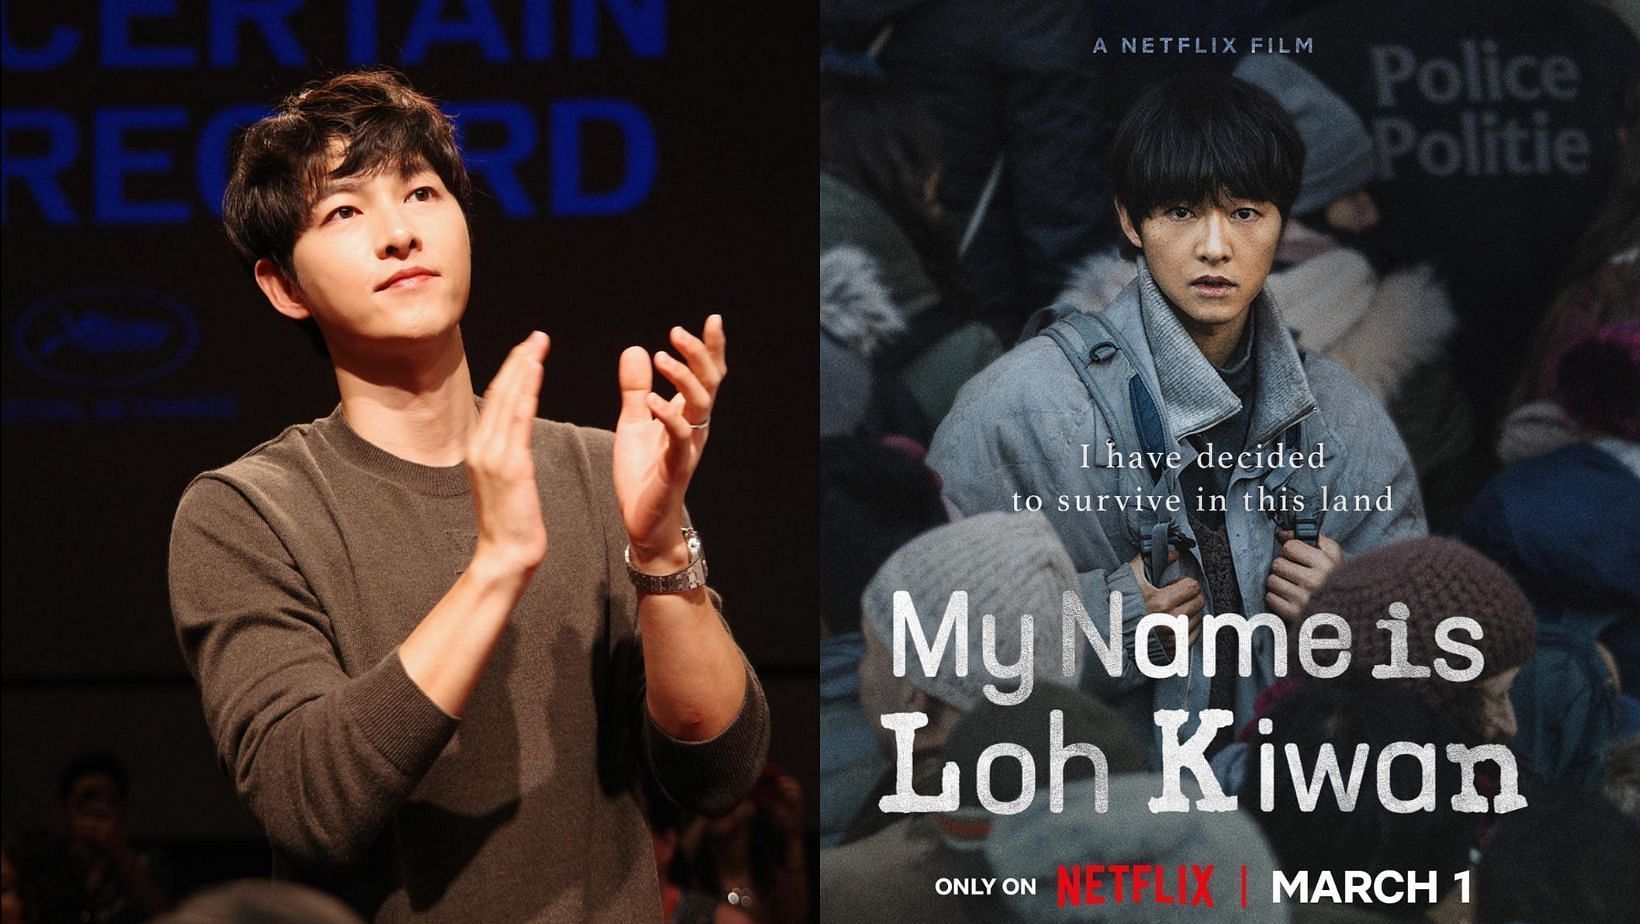 My Name Is Loh Kiwan starring Song Joong-ki and more: Release date, air time, plot, cast, teaser trailer, &amp; all you need to know. (Images via Instagram/@hi_songjoongki)